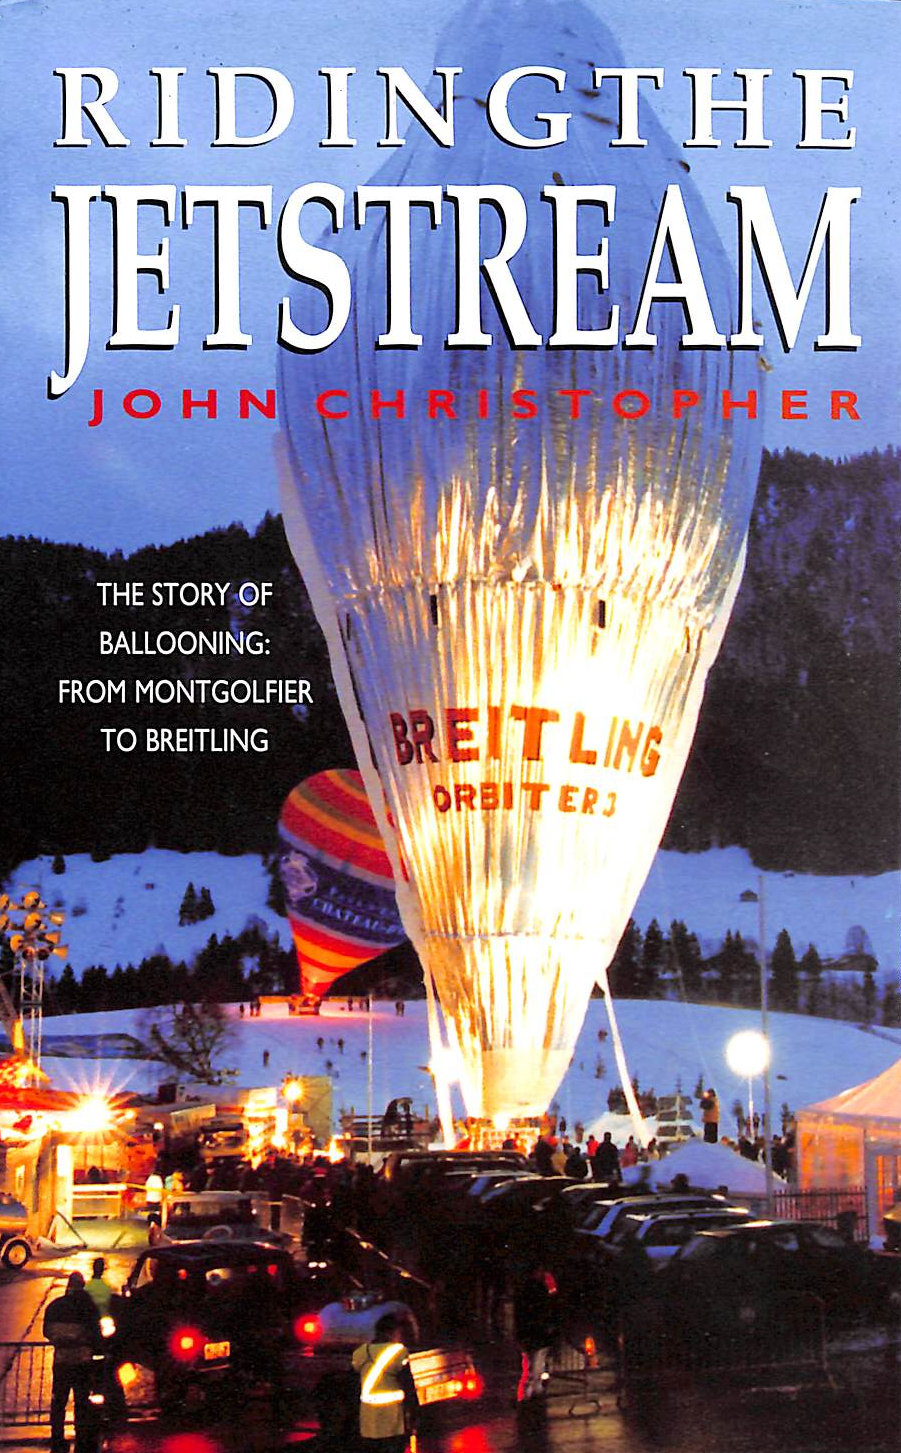 CHRISTOPHER, JO - Riding the Jetstream : The Story of Ballooning from Montgolfier to Breitling